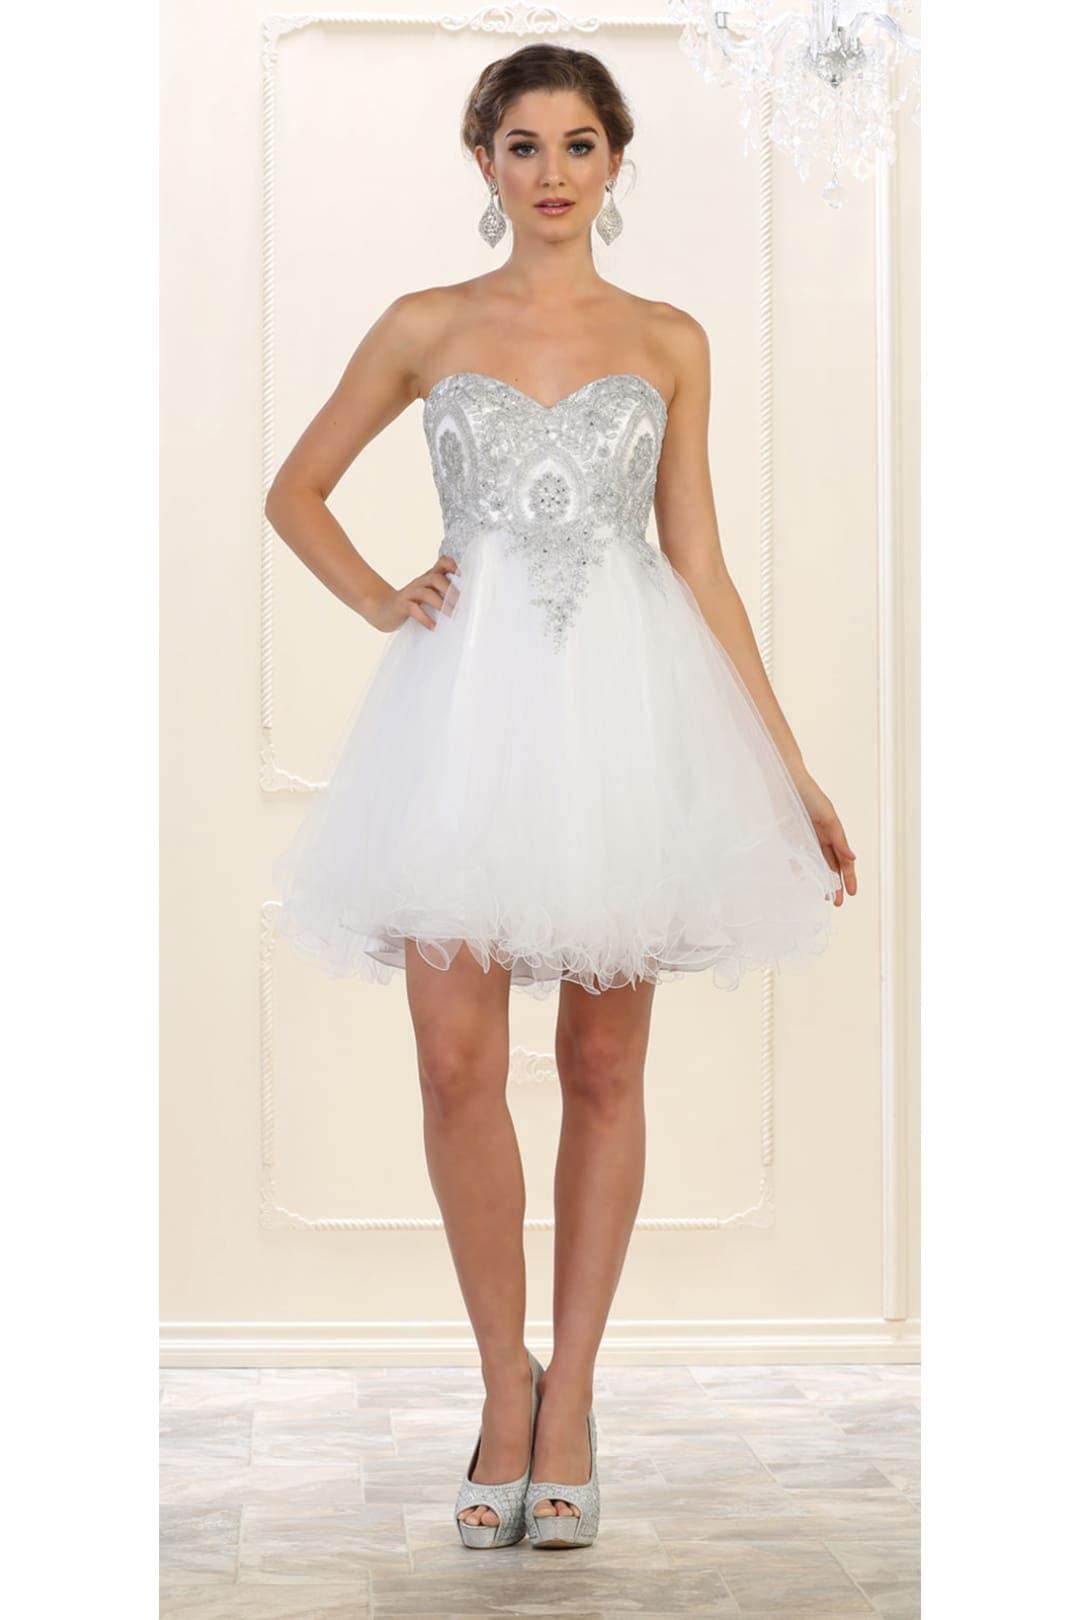 Cute Homecoming Dress - White/Silver / 8